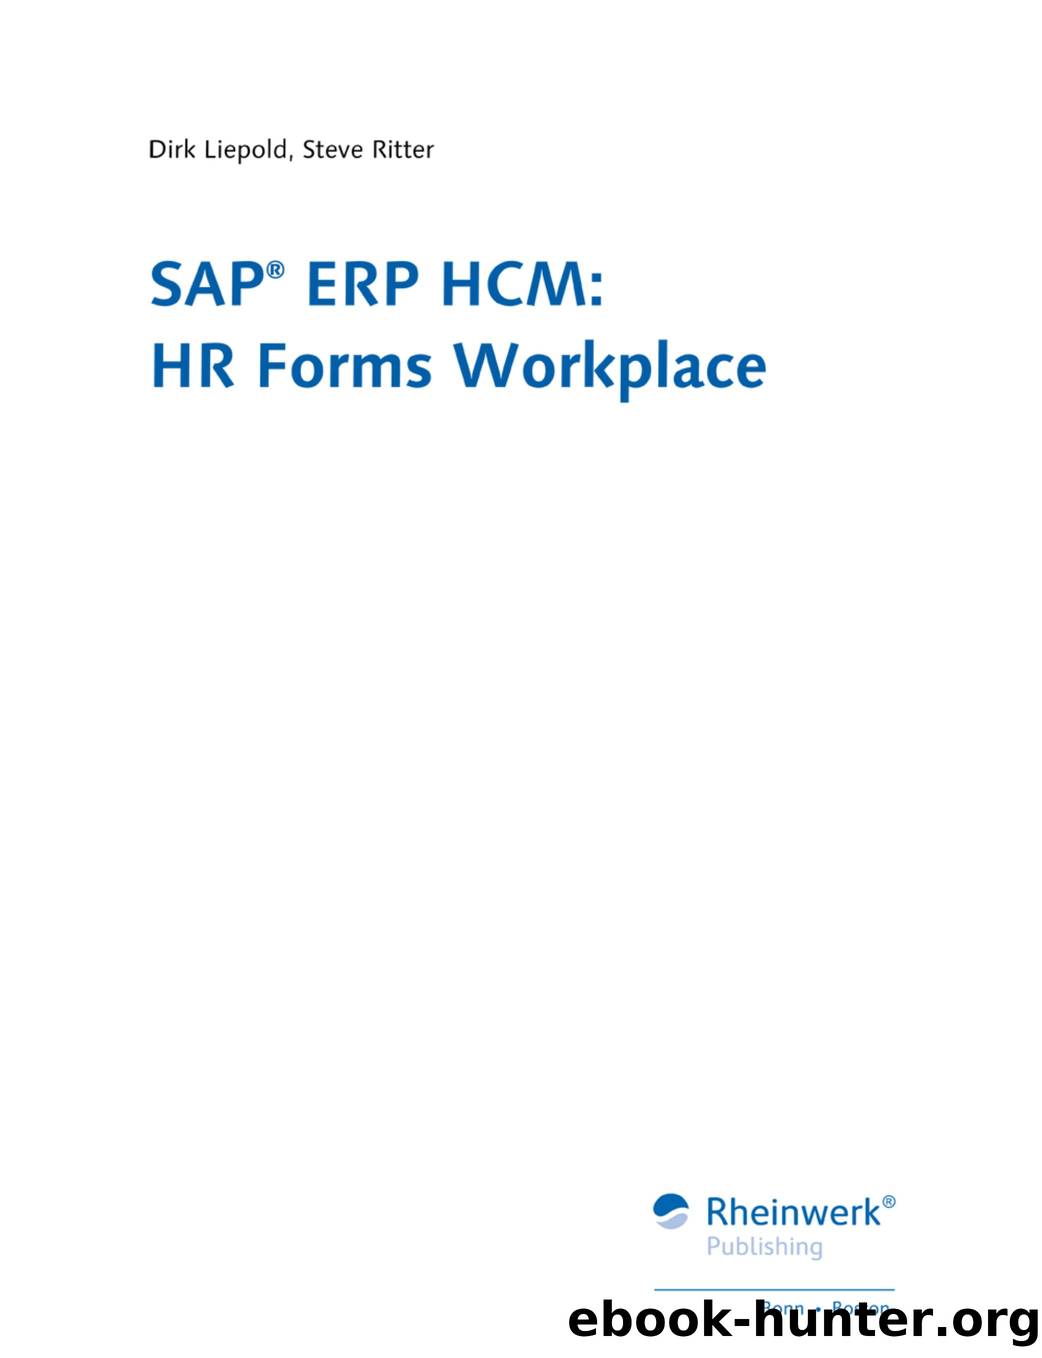 SAP ERP HCM HR Forms Workplace by Unknown